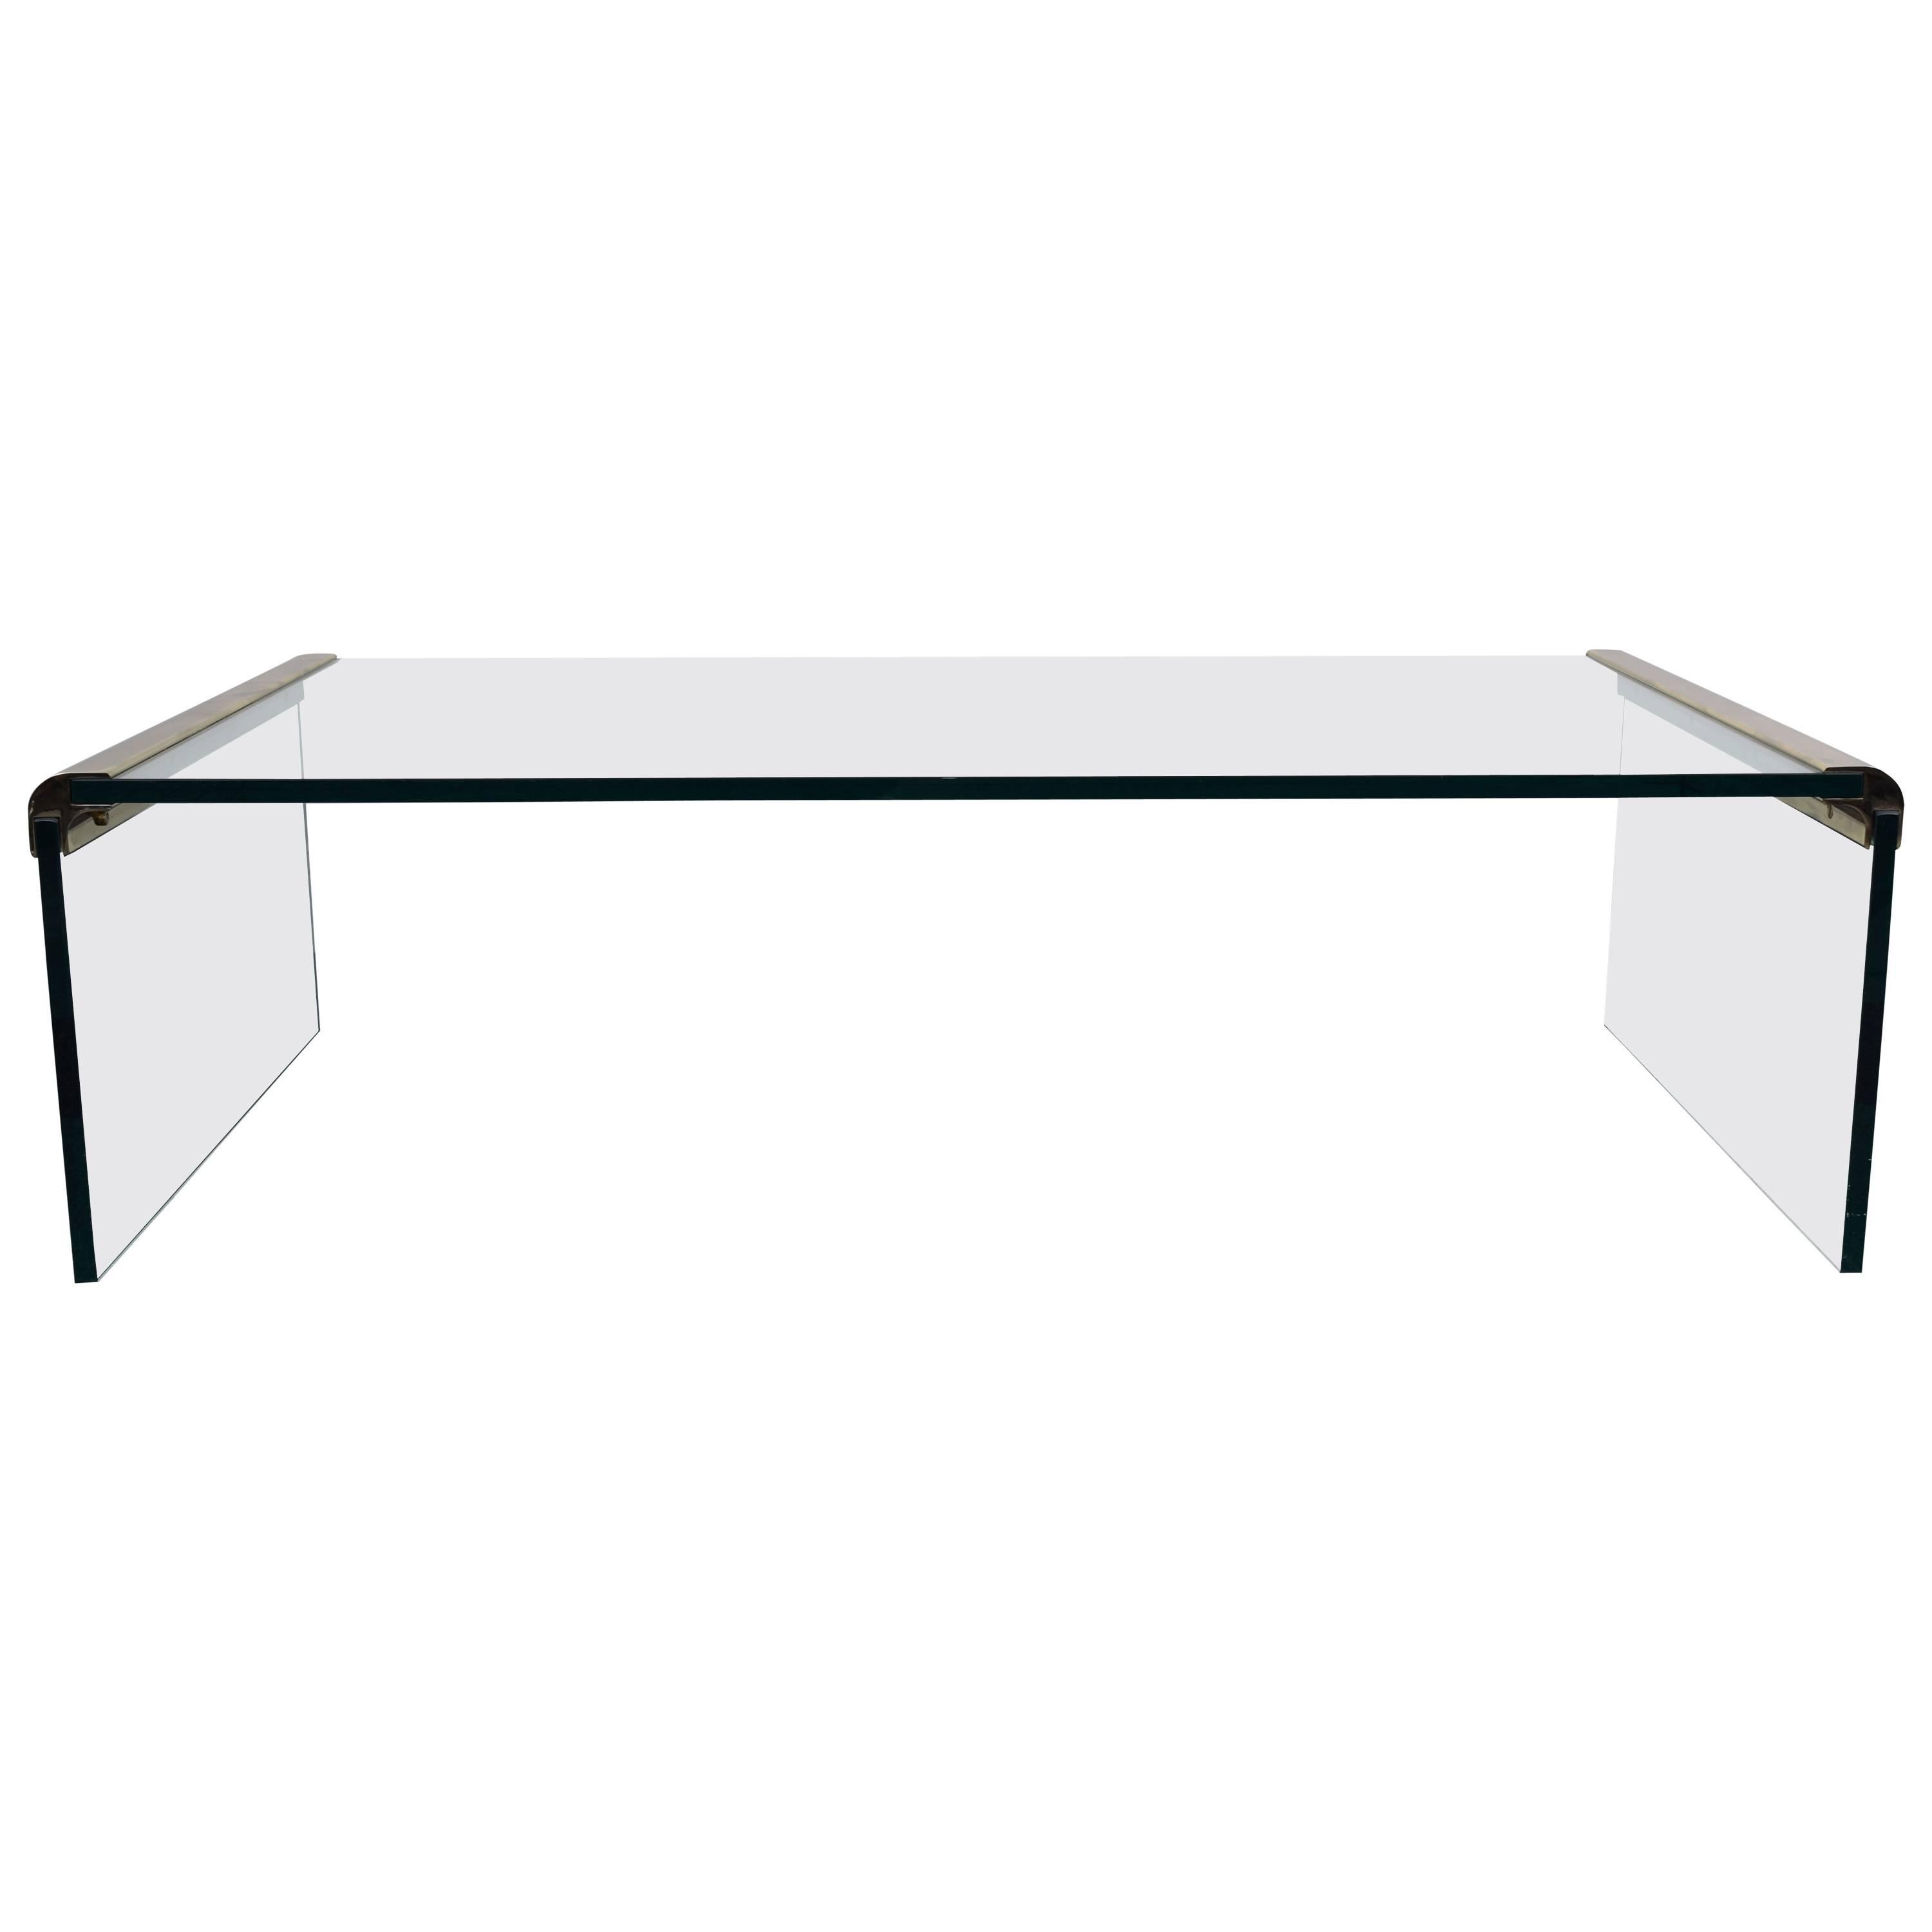 Large Pace Coffee Table For Sale